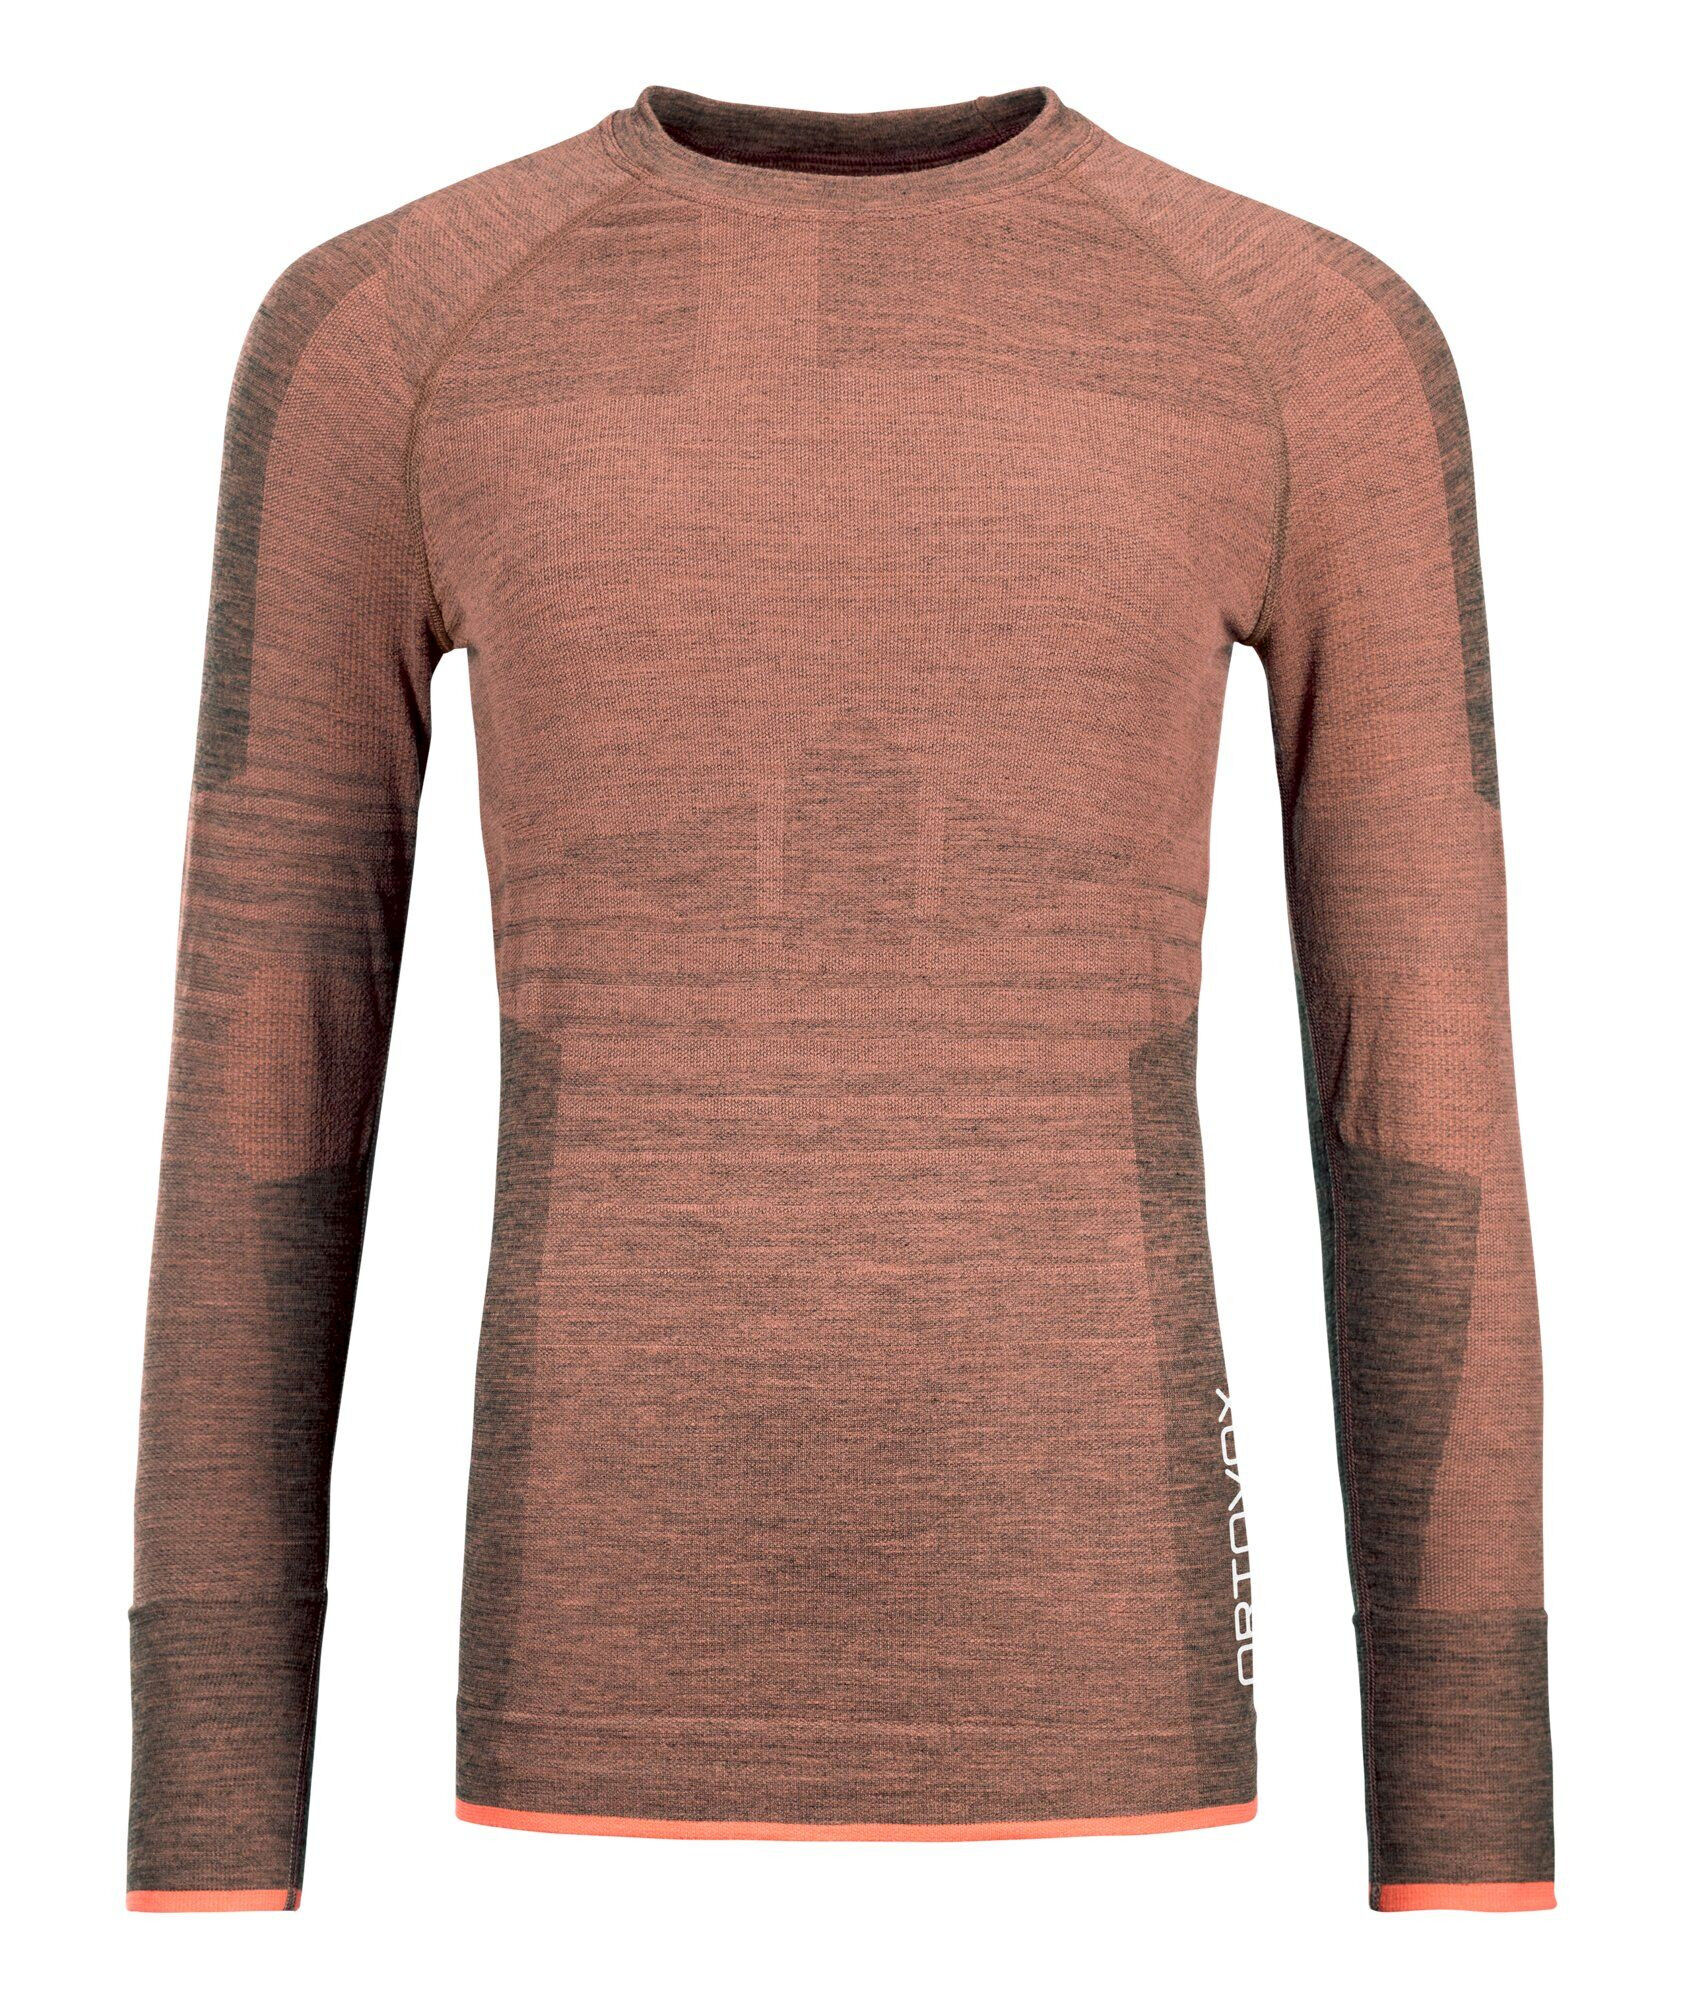 Ortovox 230 Competition Long Sleeve - Ropa interior - Mujer